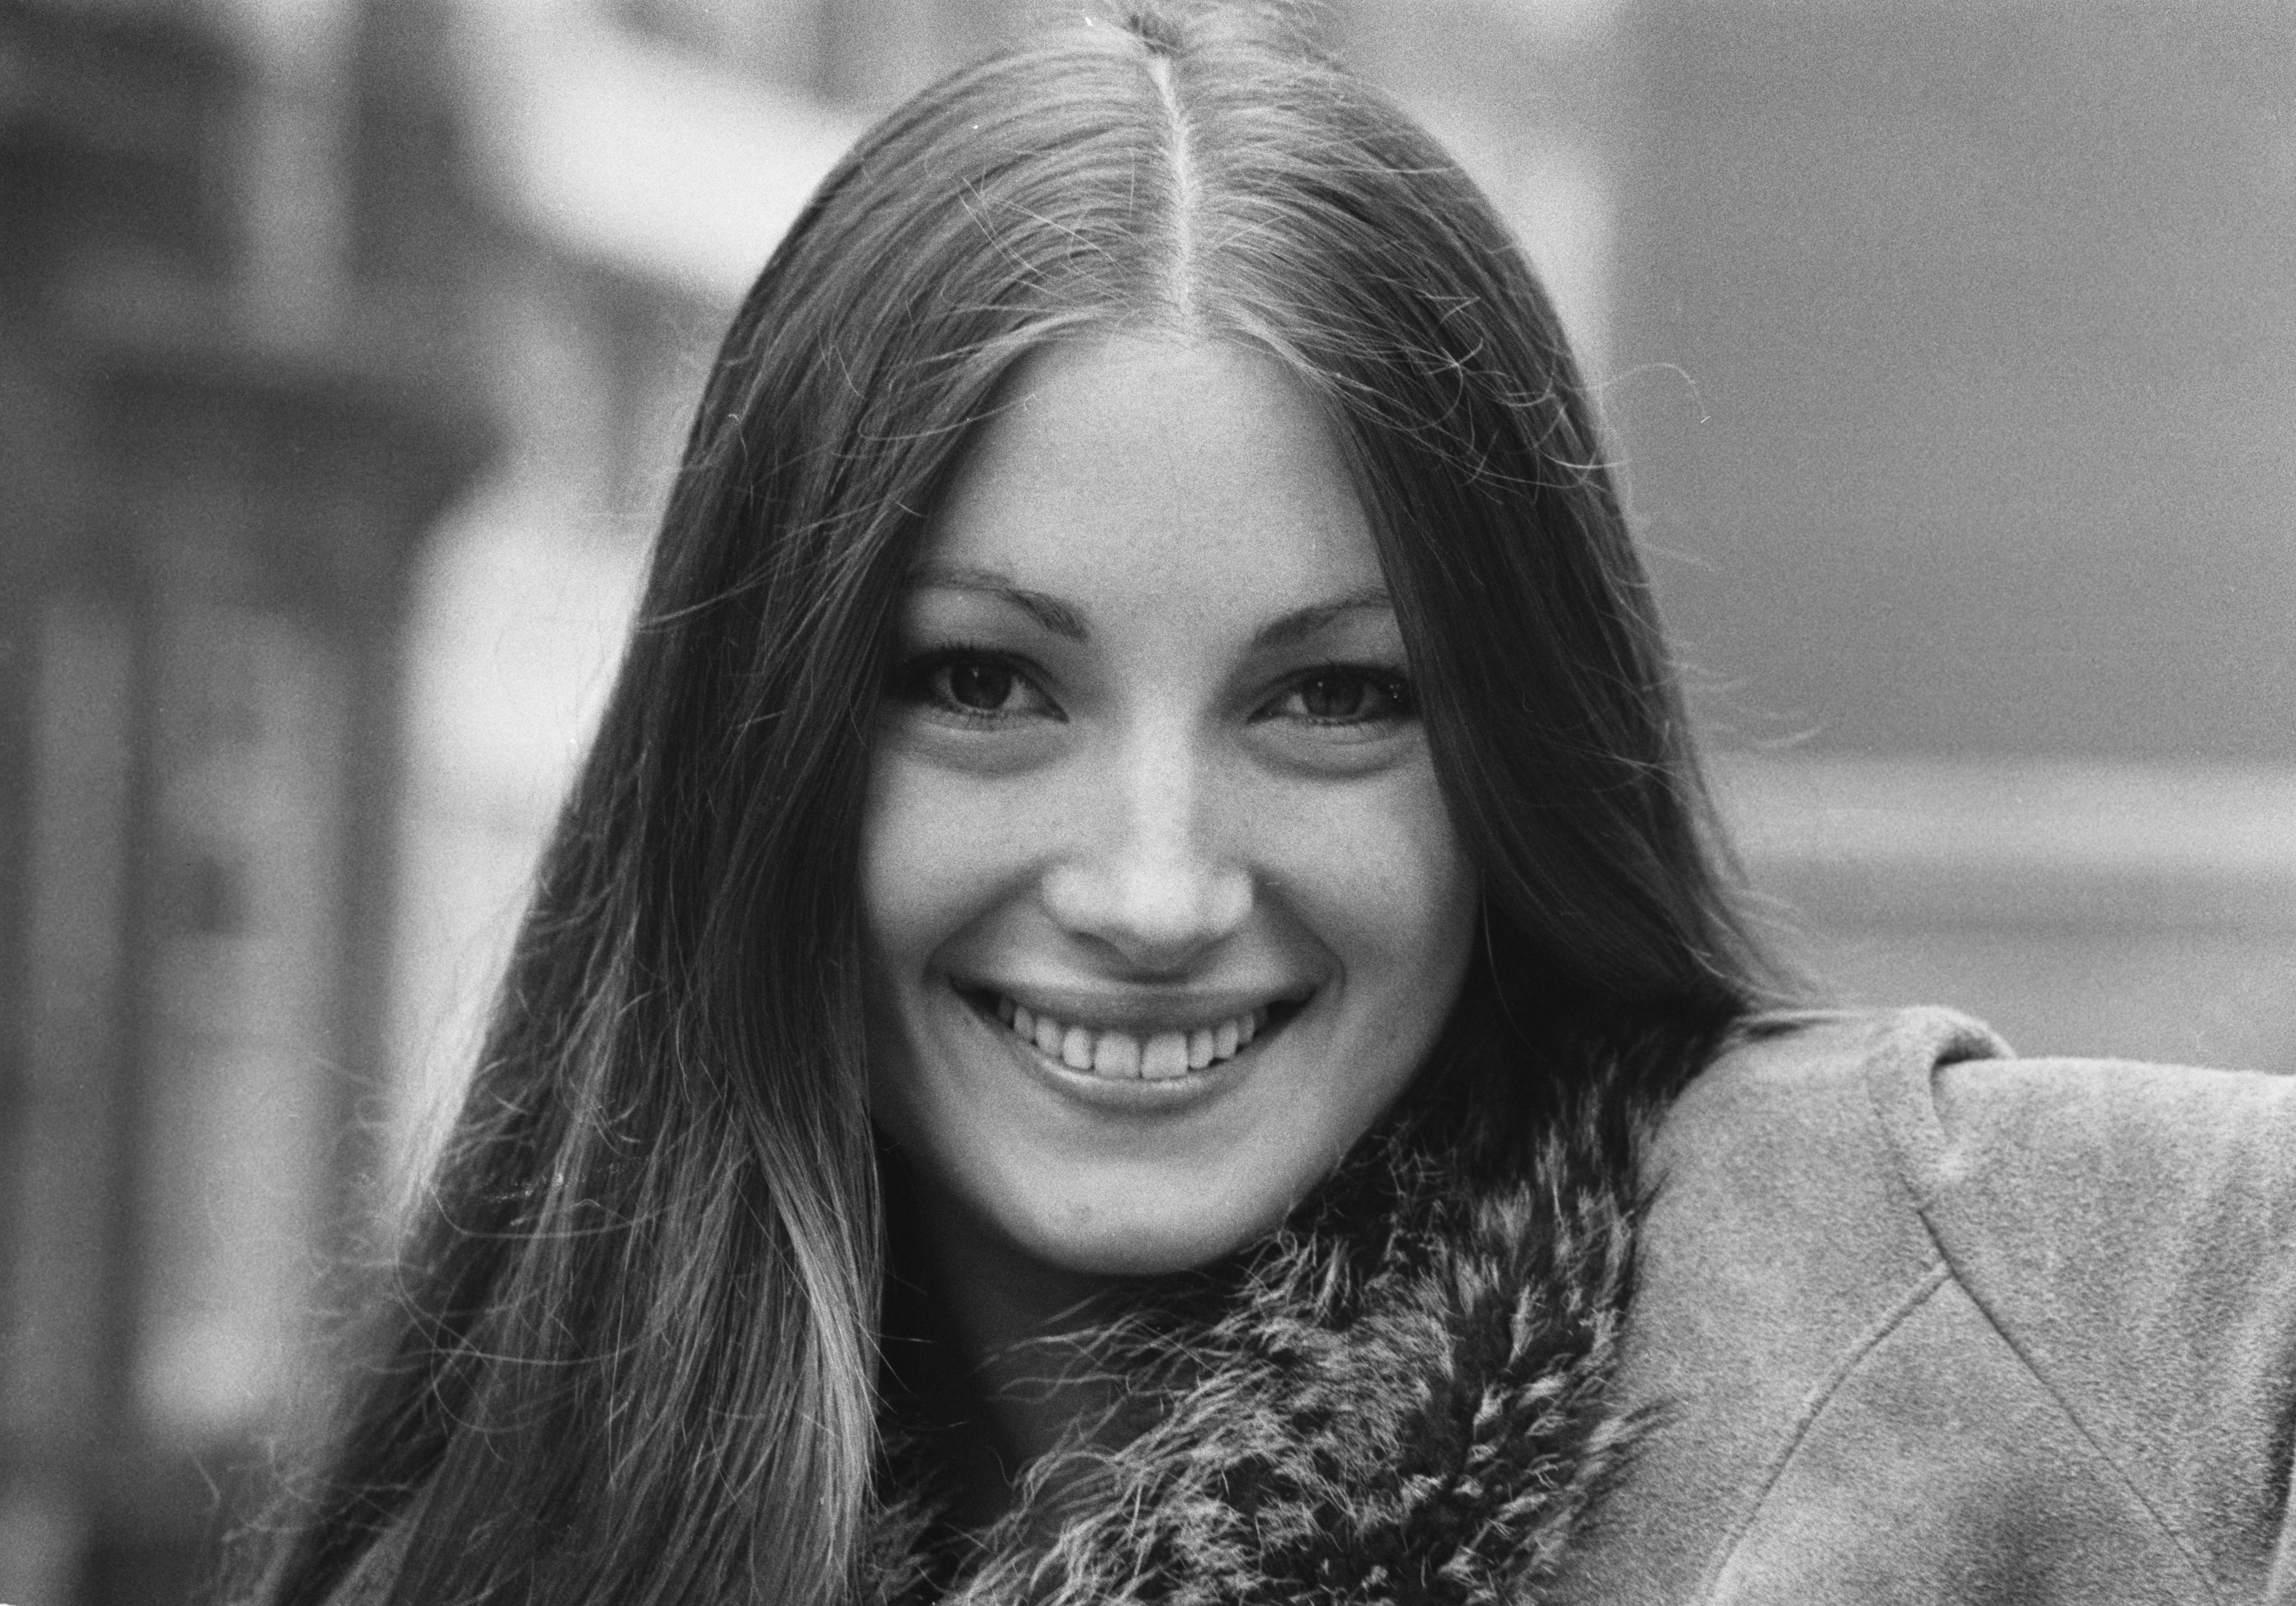 Jane Seymour posing for a photo in the UK on October 11, 1972. | Source: Getty Images